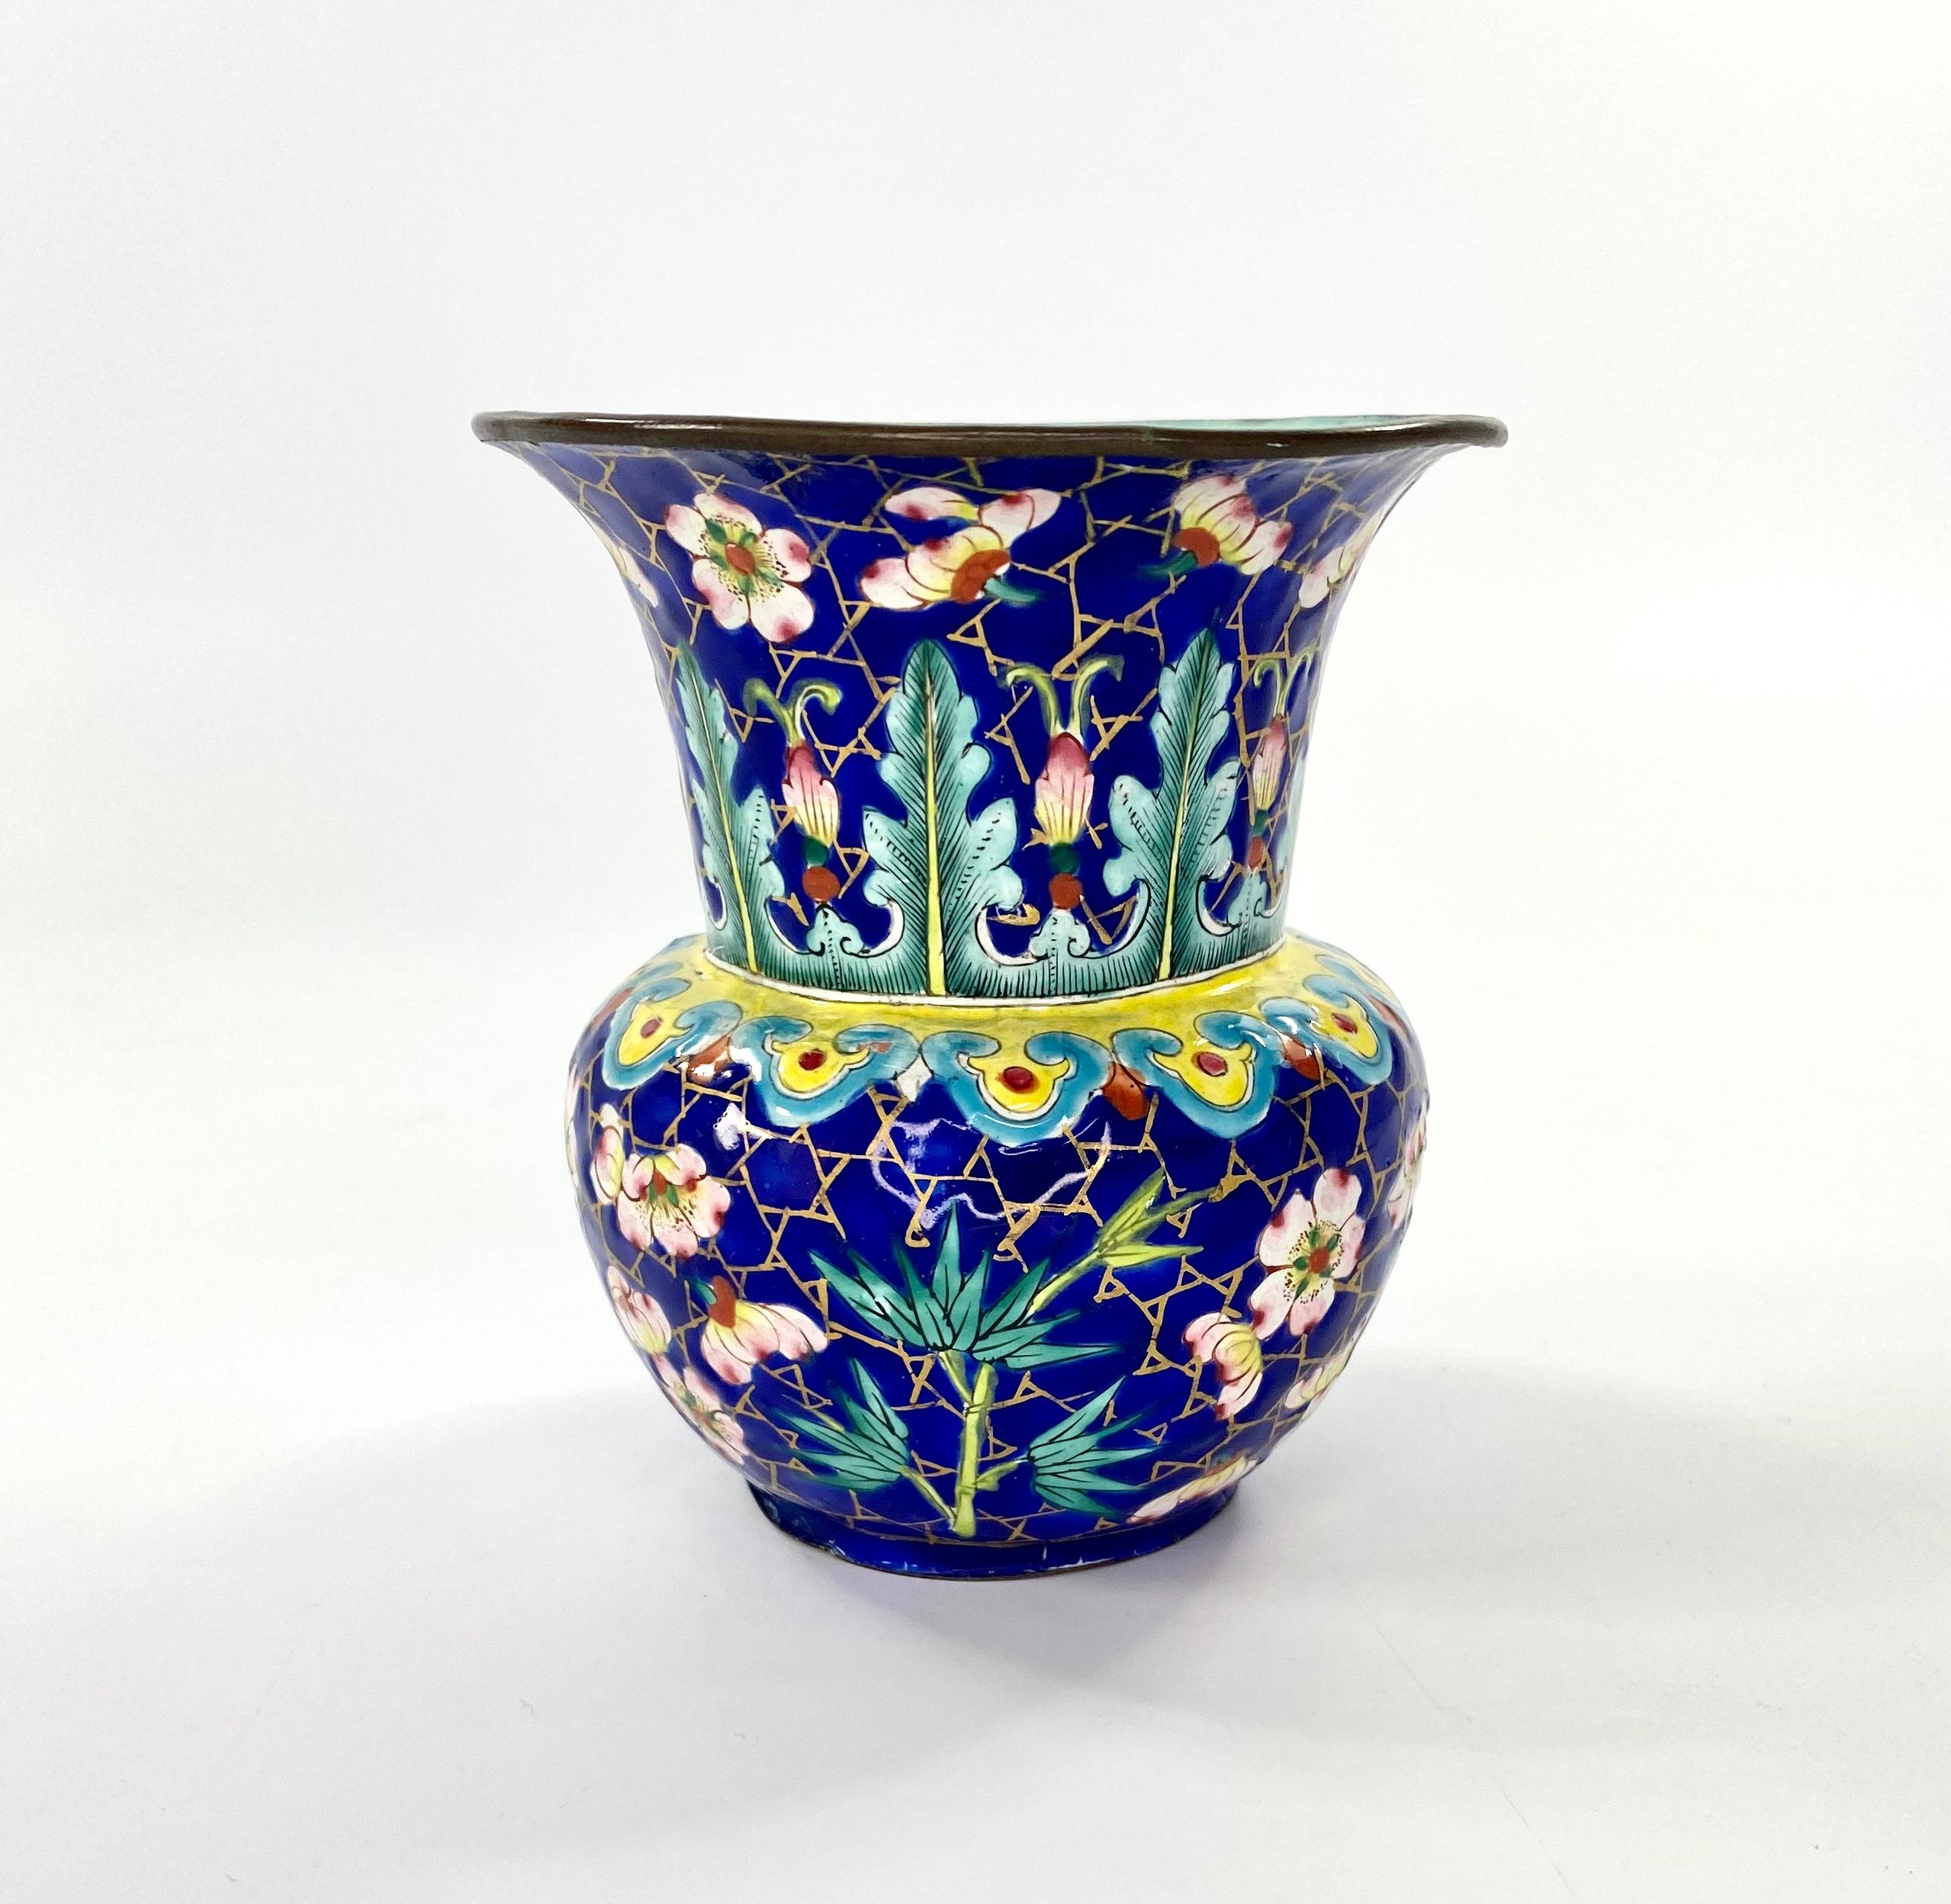 Chinese ‘Canton’ enamel zahdou or Leys jar, late 18th century, Qianlong / Jiaqing Period. The body of the jar painted with flowering prunus, and bamboo, on a gilt ‘cracked ice’ and cobalt blue ground, beneath a continuous yellow Ruyi head motif.